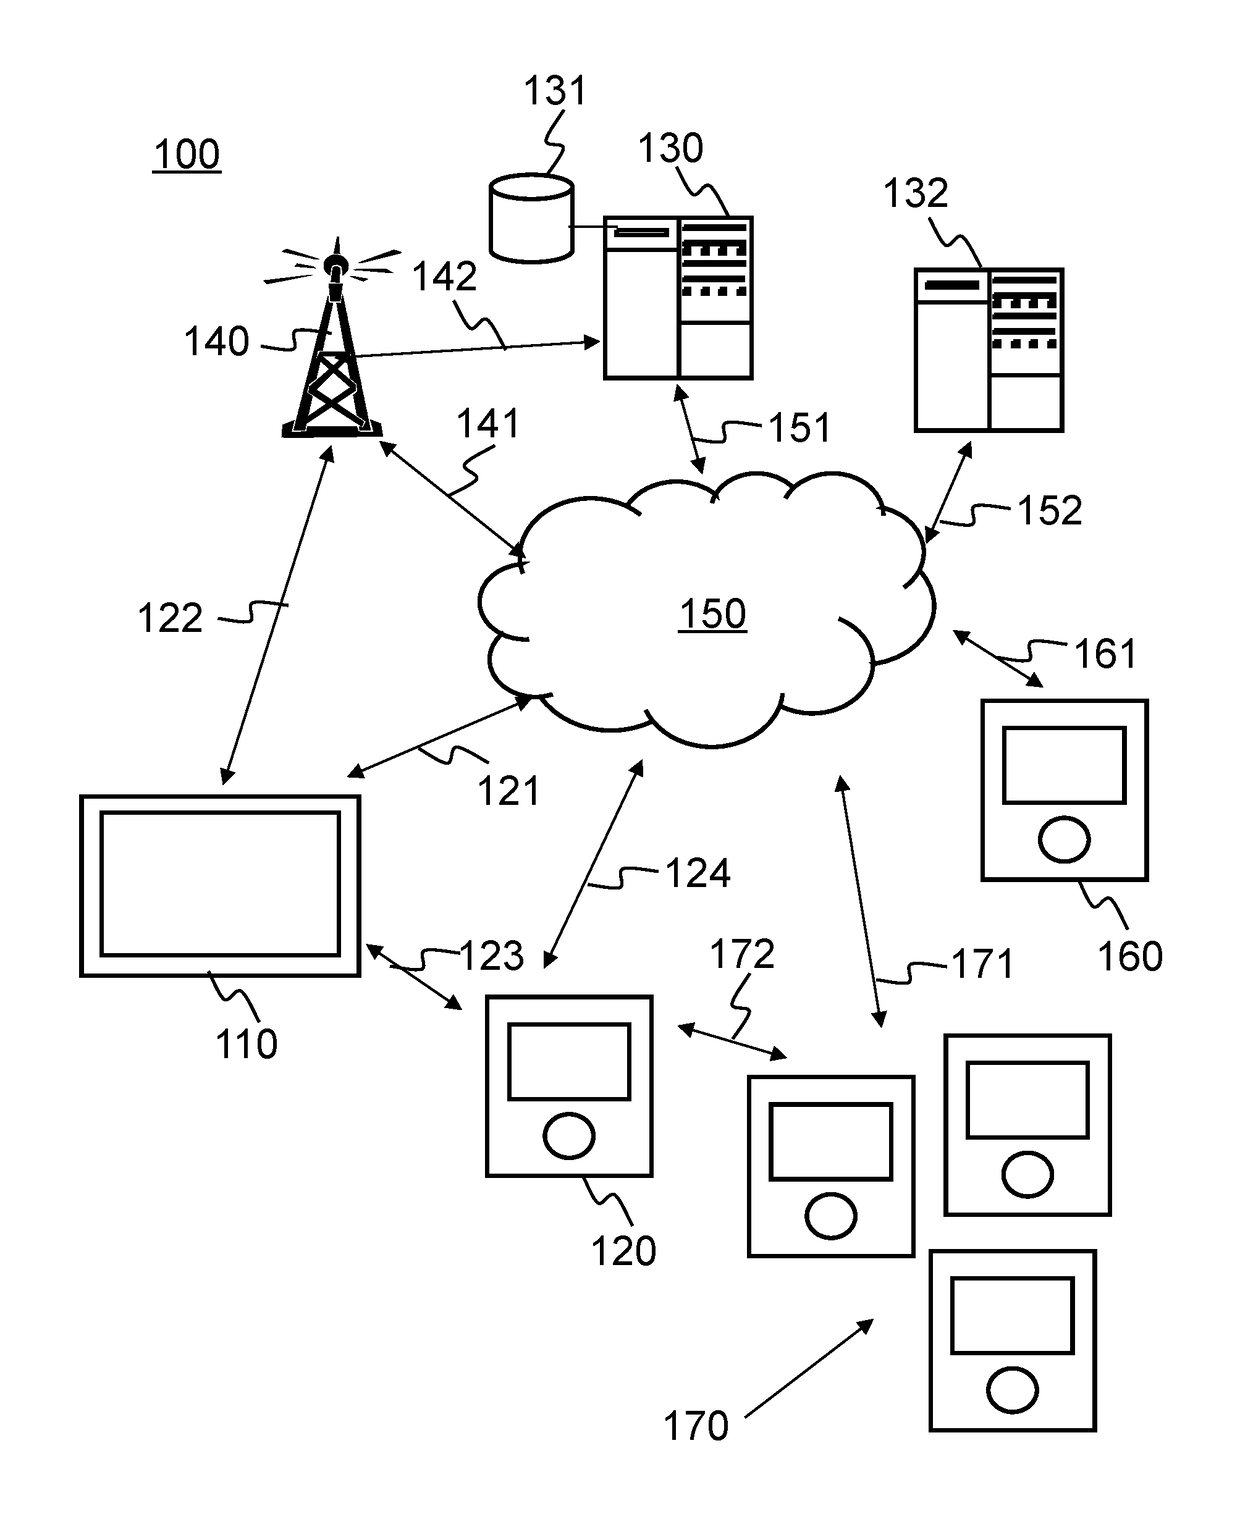 Computer implemented method for providing multi-camera live broadcasting service